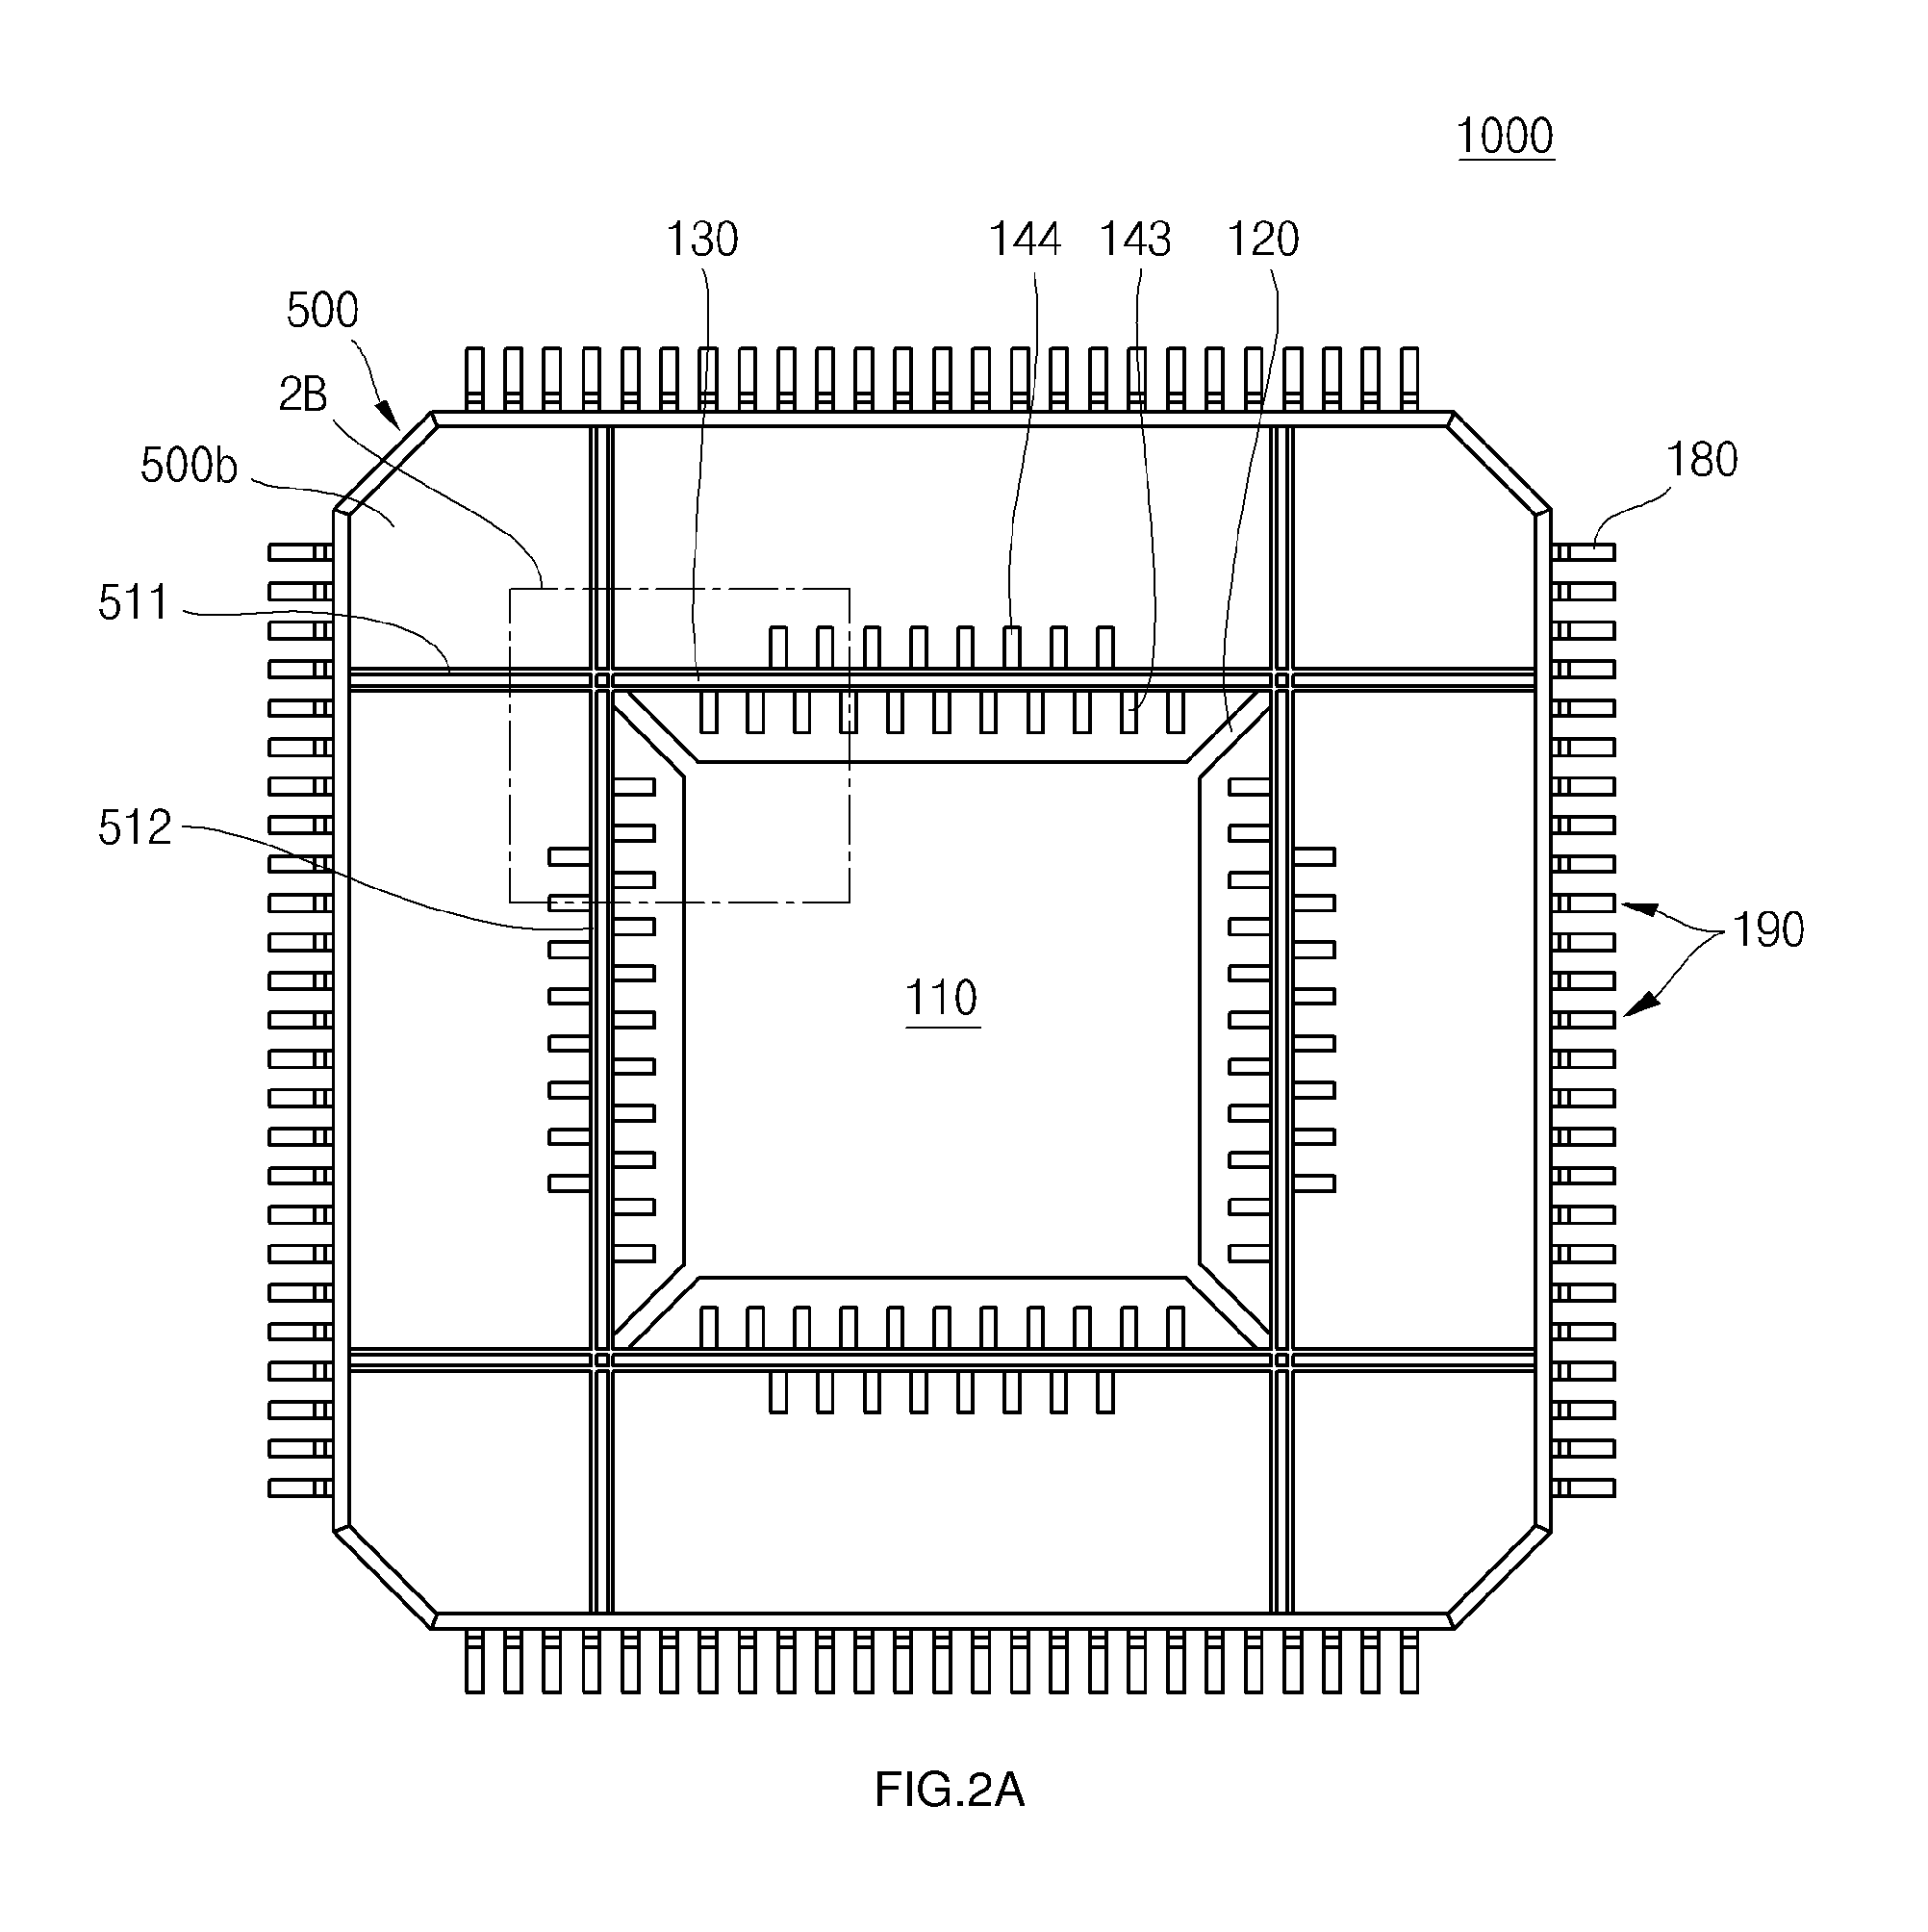 Semiconductor device with increased I/O leadframe including power bars